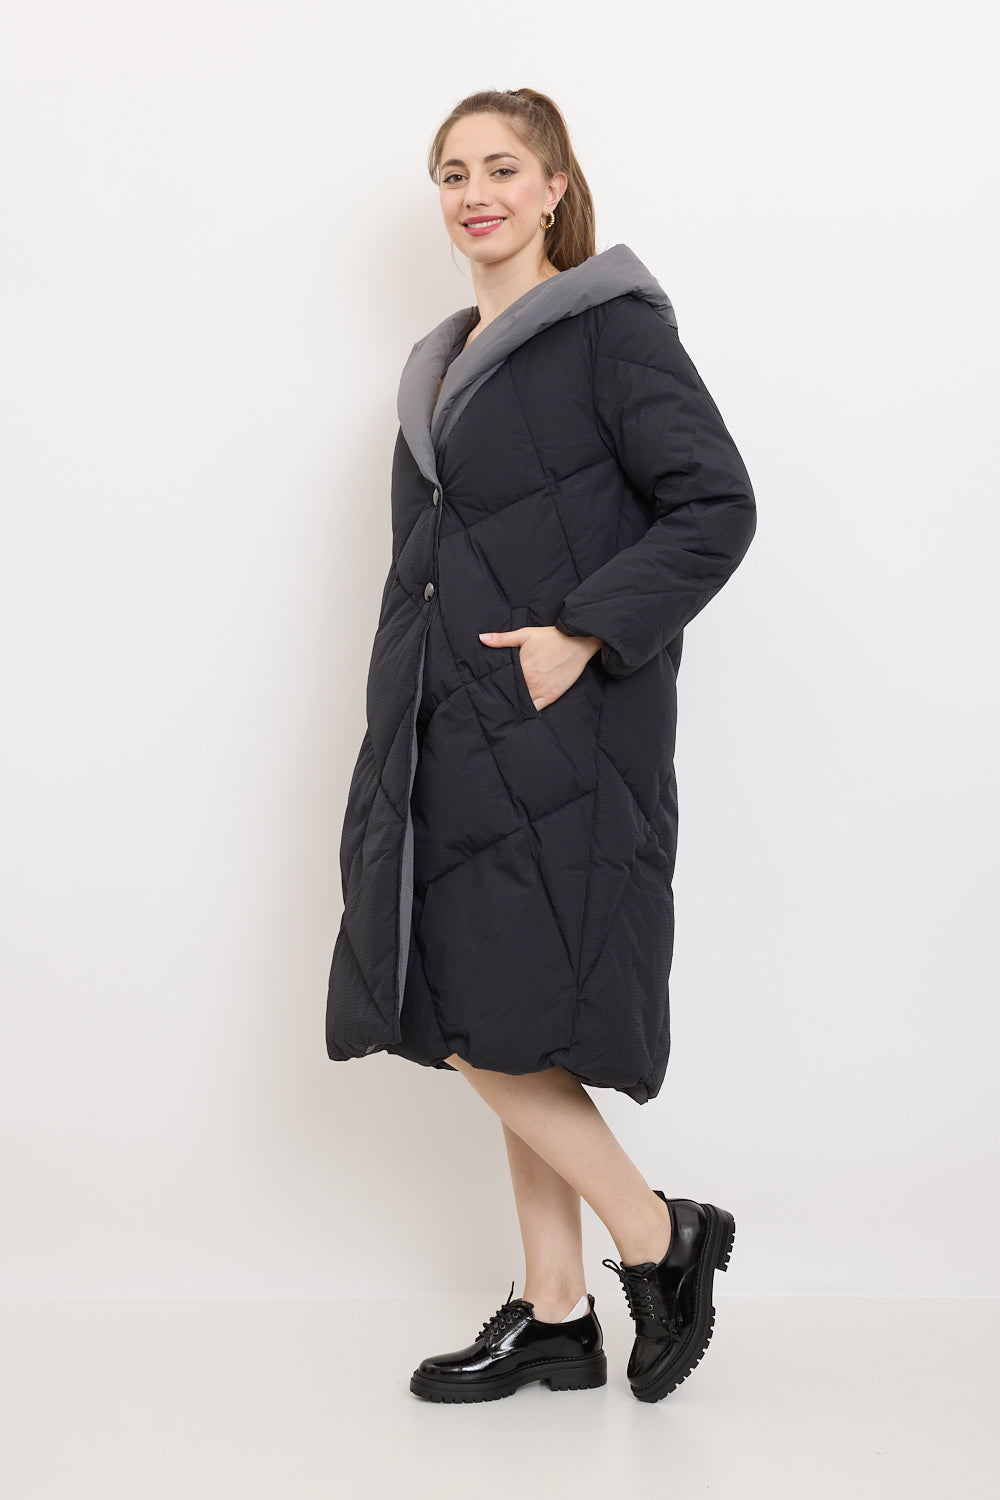 Cozy black and gray coat with large checks